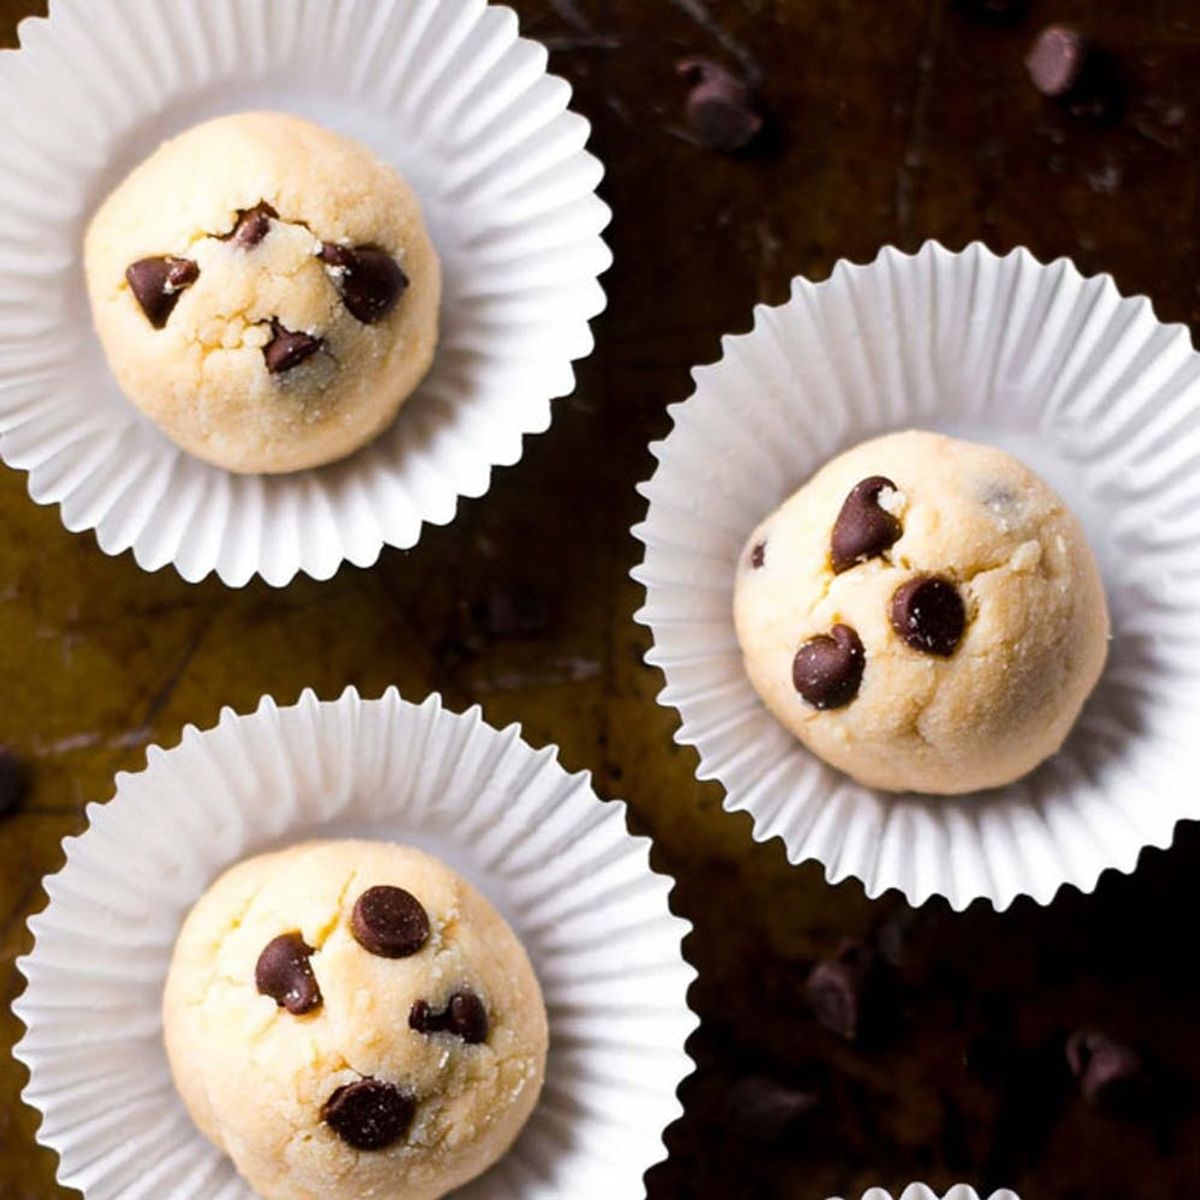 20 Yummy Desserts Secretly Packed With Protein